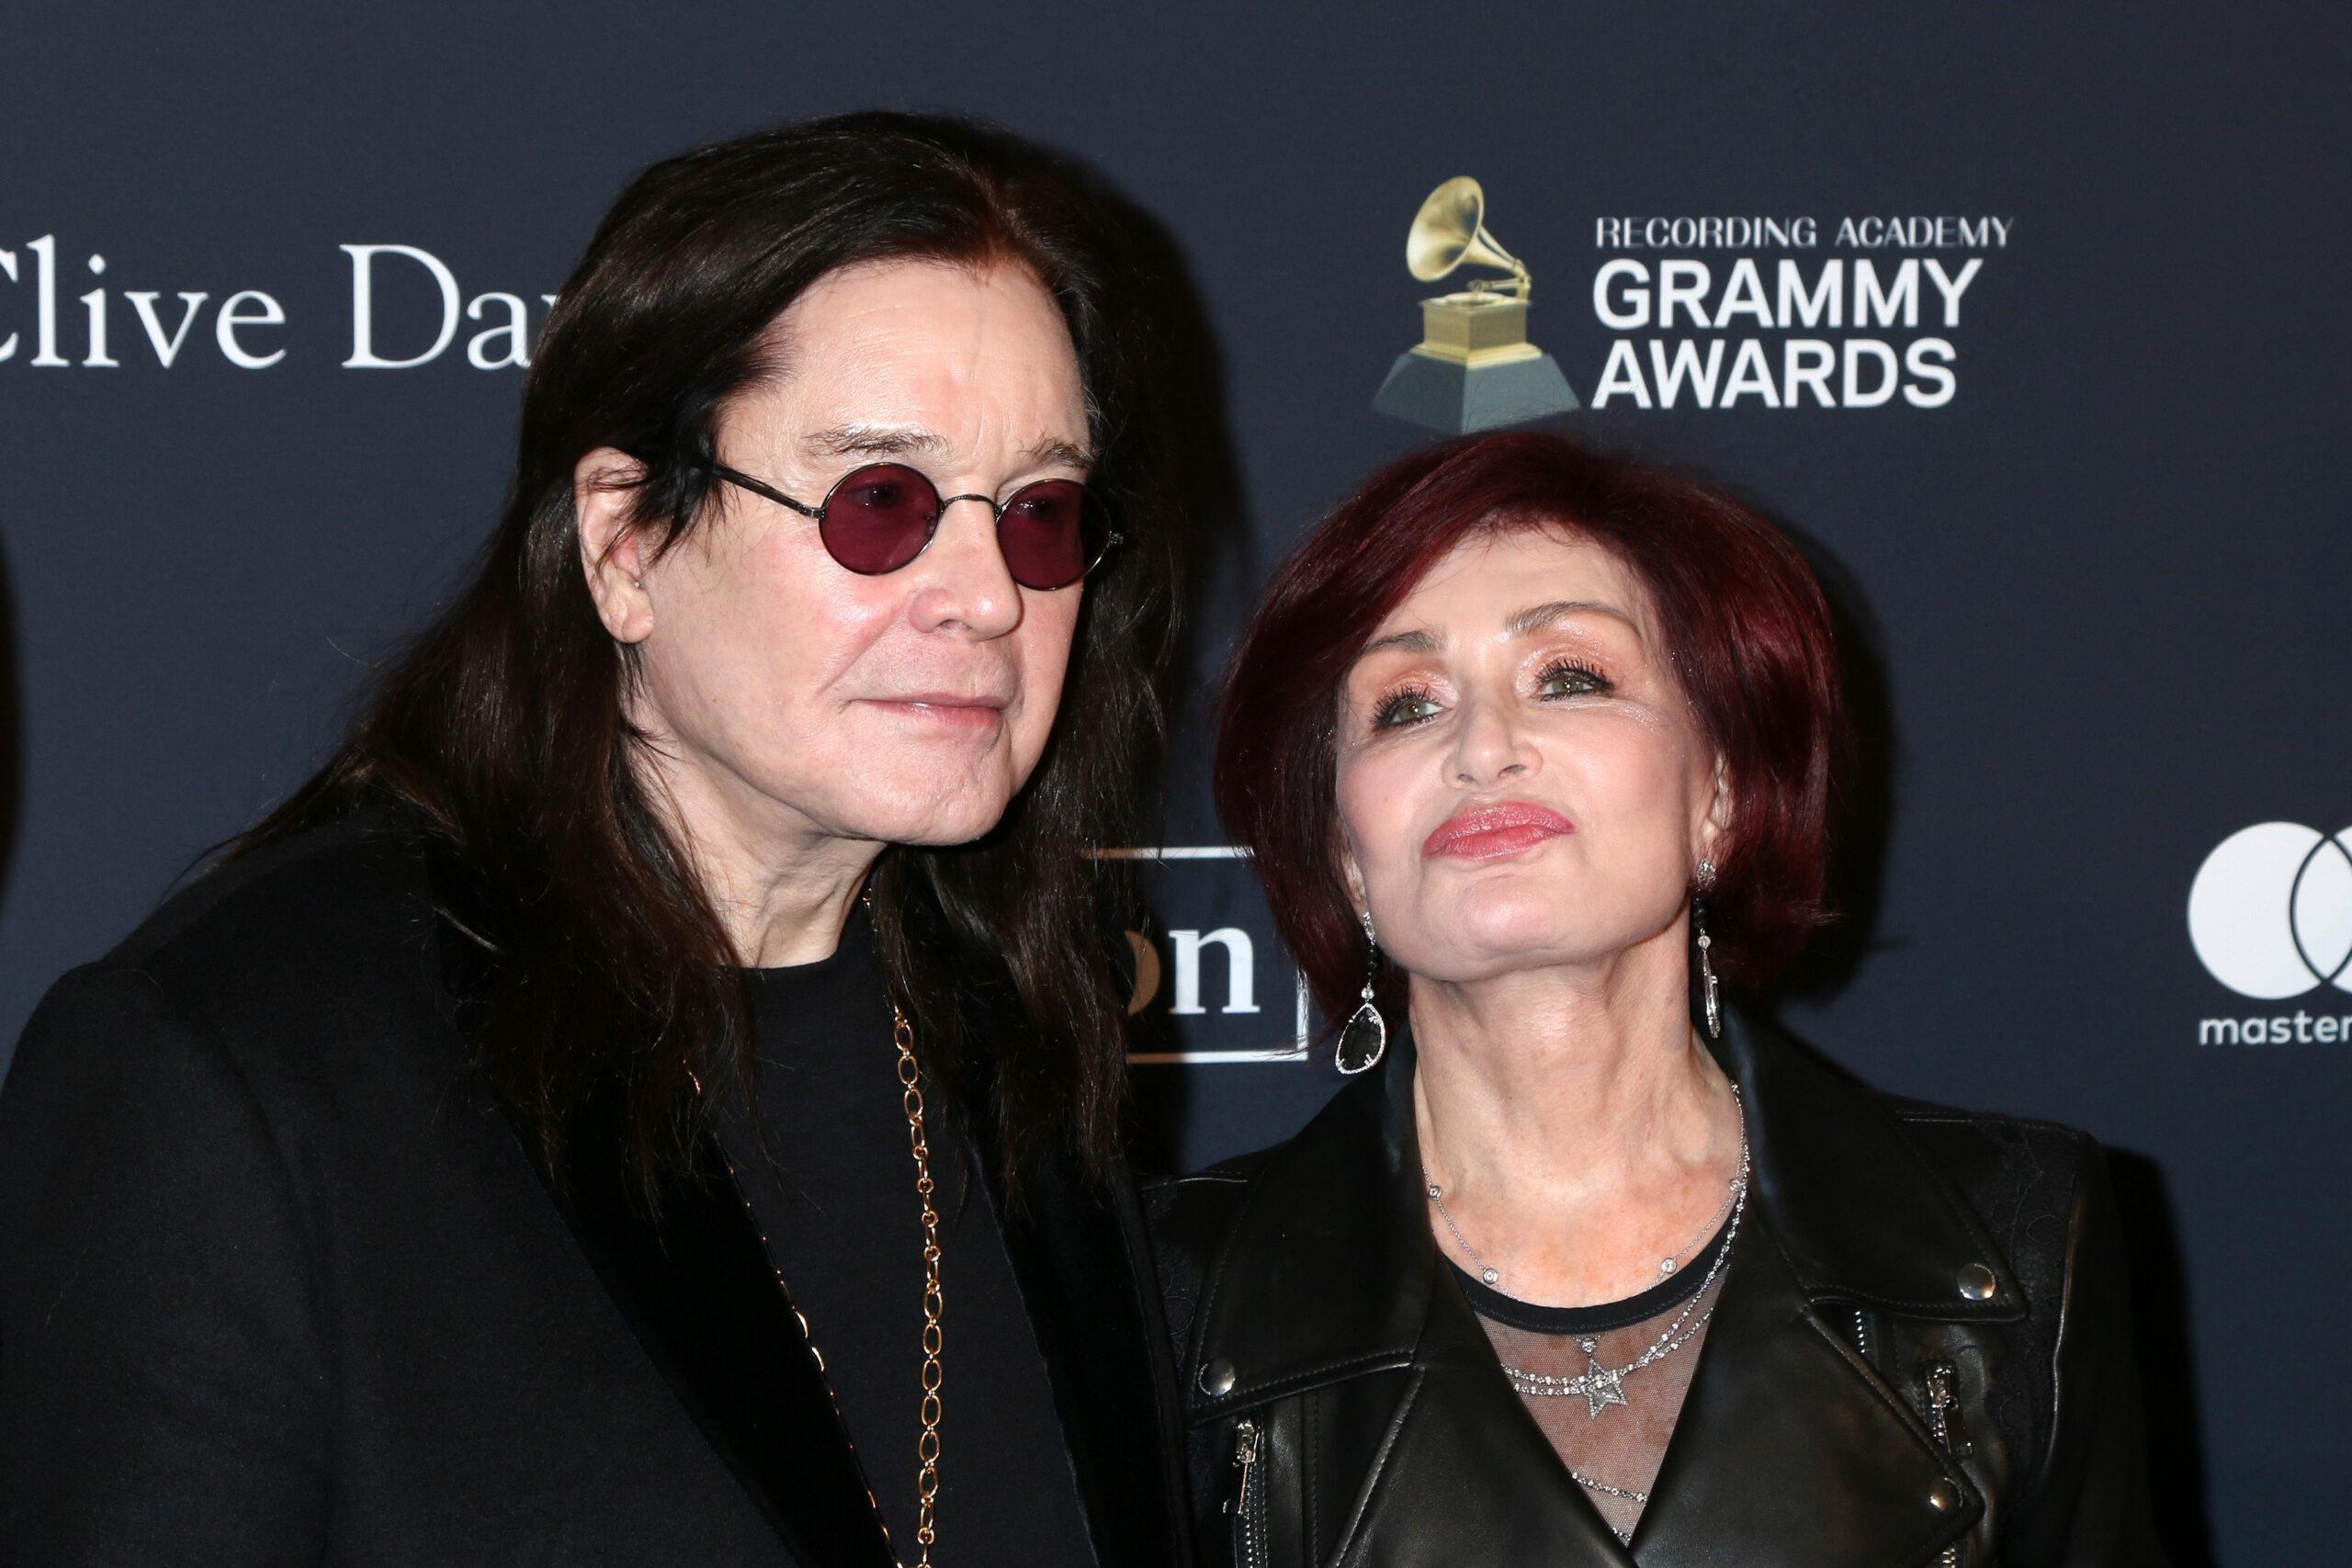 LOS ANGELES - JAN 25: Ozzy Osbourne, Sharon Osbourne at the 2020 Clive Davis Pre-Grammy Party at the Beverly Hilton Hotel on January 25, 2020 in Beverly Hills, CA